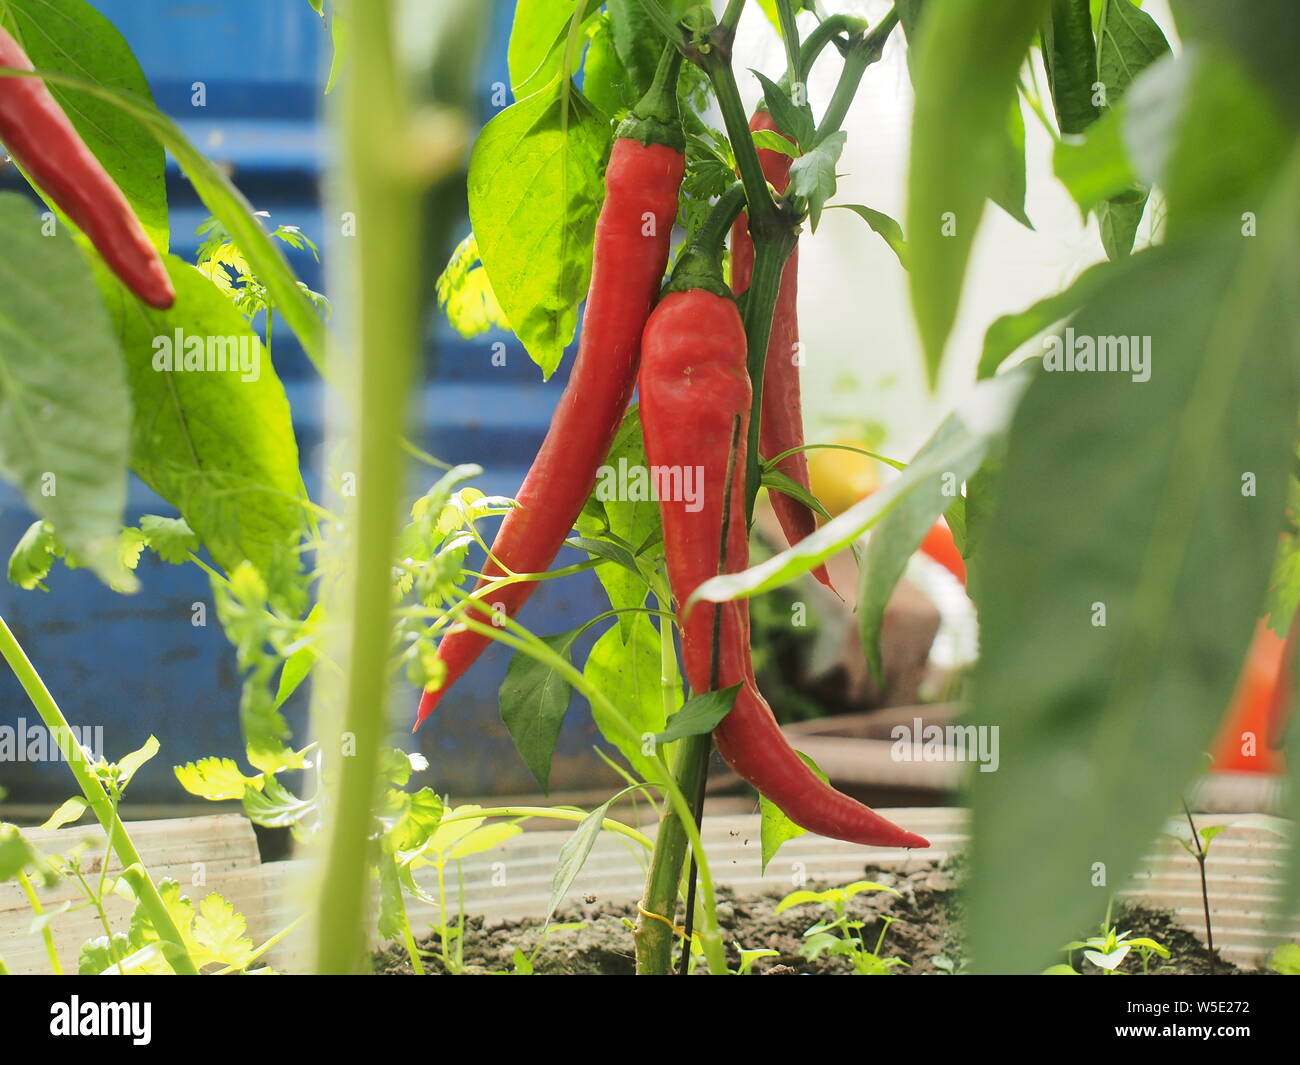 Sur les buissons hanging red peppers. Olericulture. L'agriculture. Close up. Banque D'Images